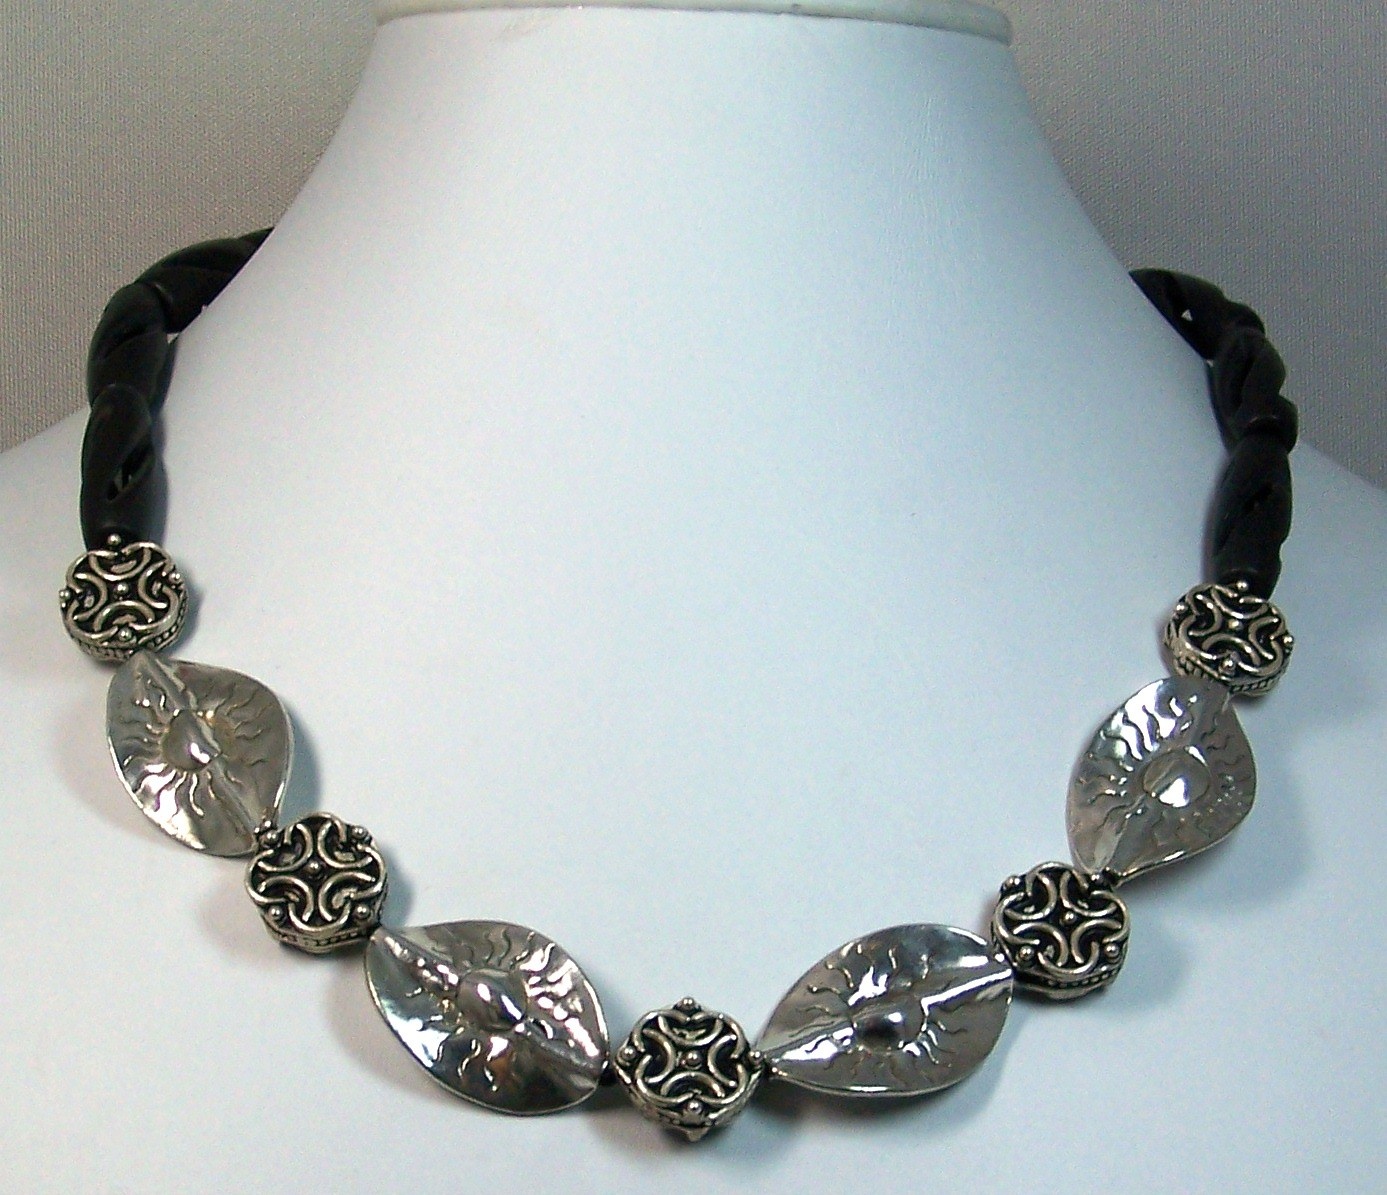 Necklace of sterling silver leaves separated by filigree silver beads , finished with twisted black stone beads